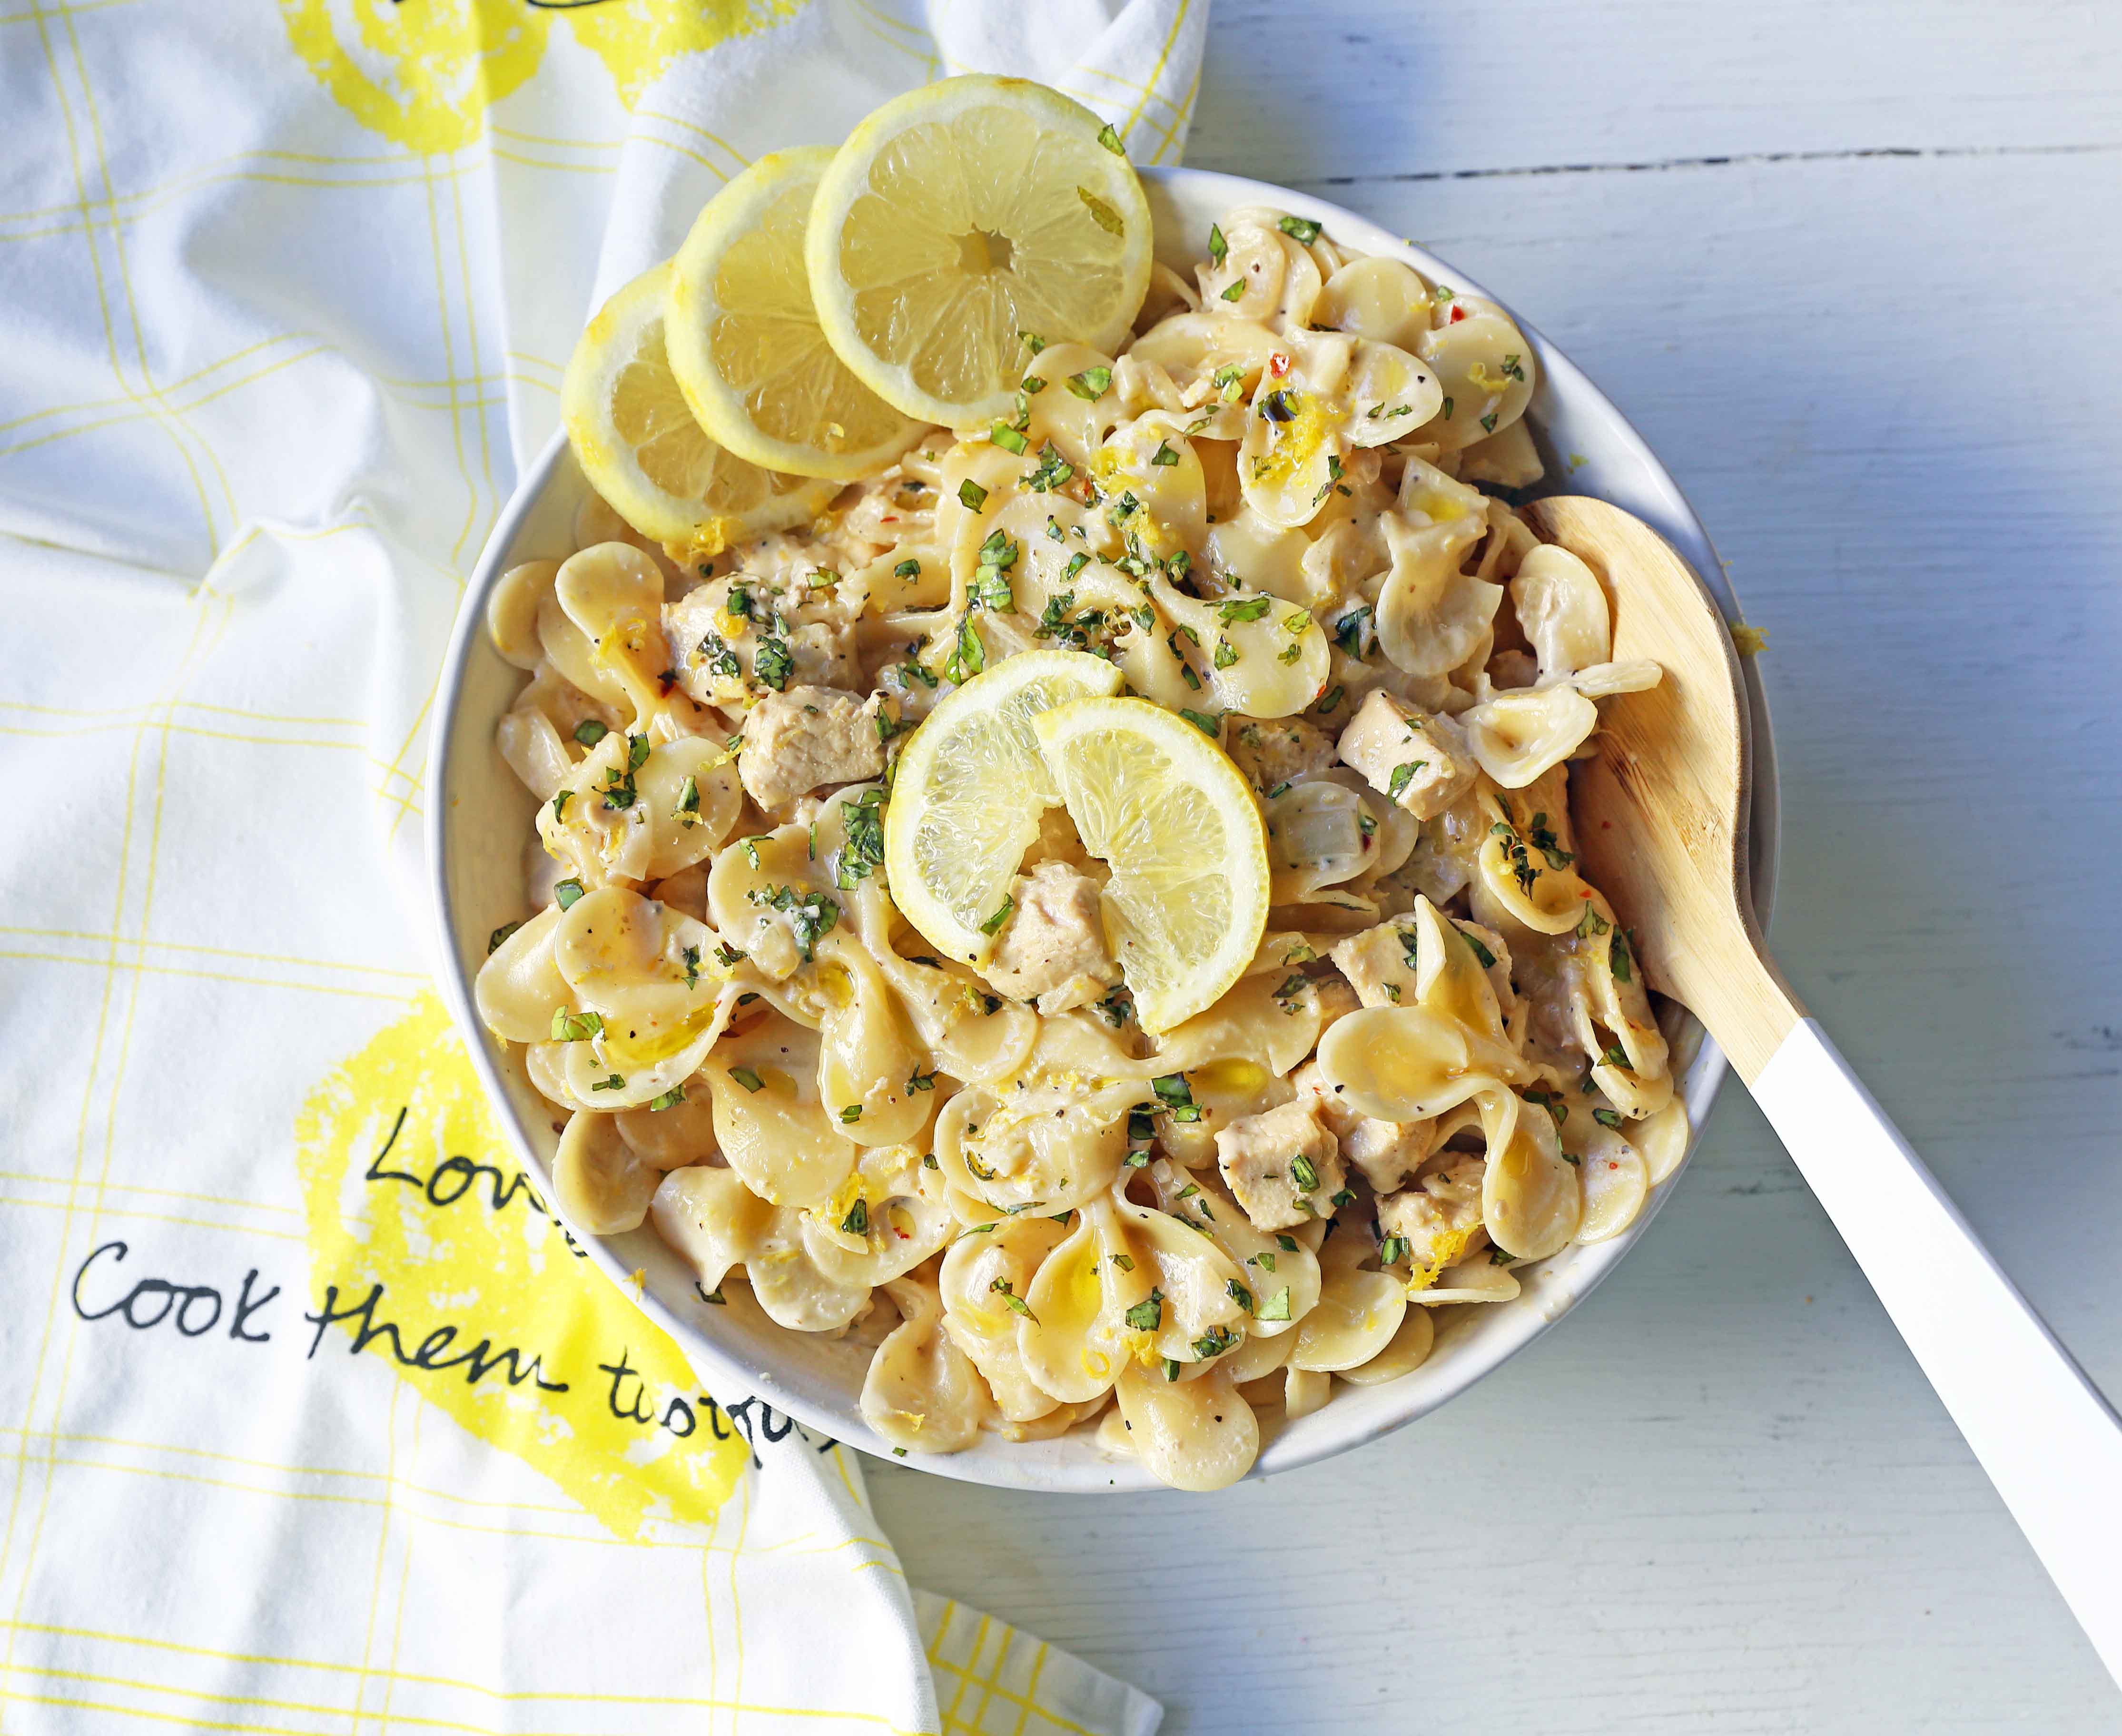 Creamy Lemon Chicken Pasta.Sauteed chicken in a rich creamy lemon basil sauce tossed with your favorite kind of pasta.  A quick and easy 30-minute meal! www.modernhoney.com #lemonpasta #lemonchickenpasta #pasta #pastarecipes